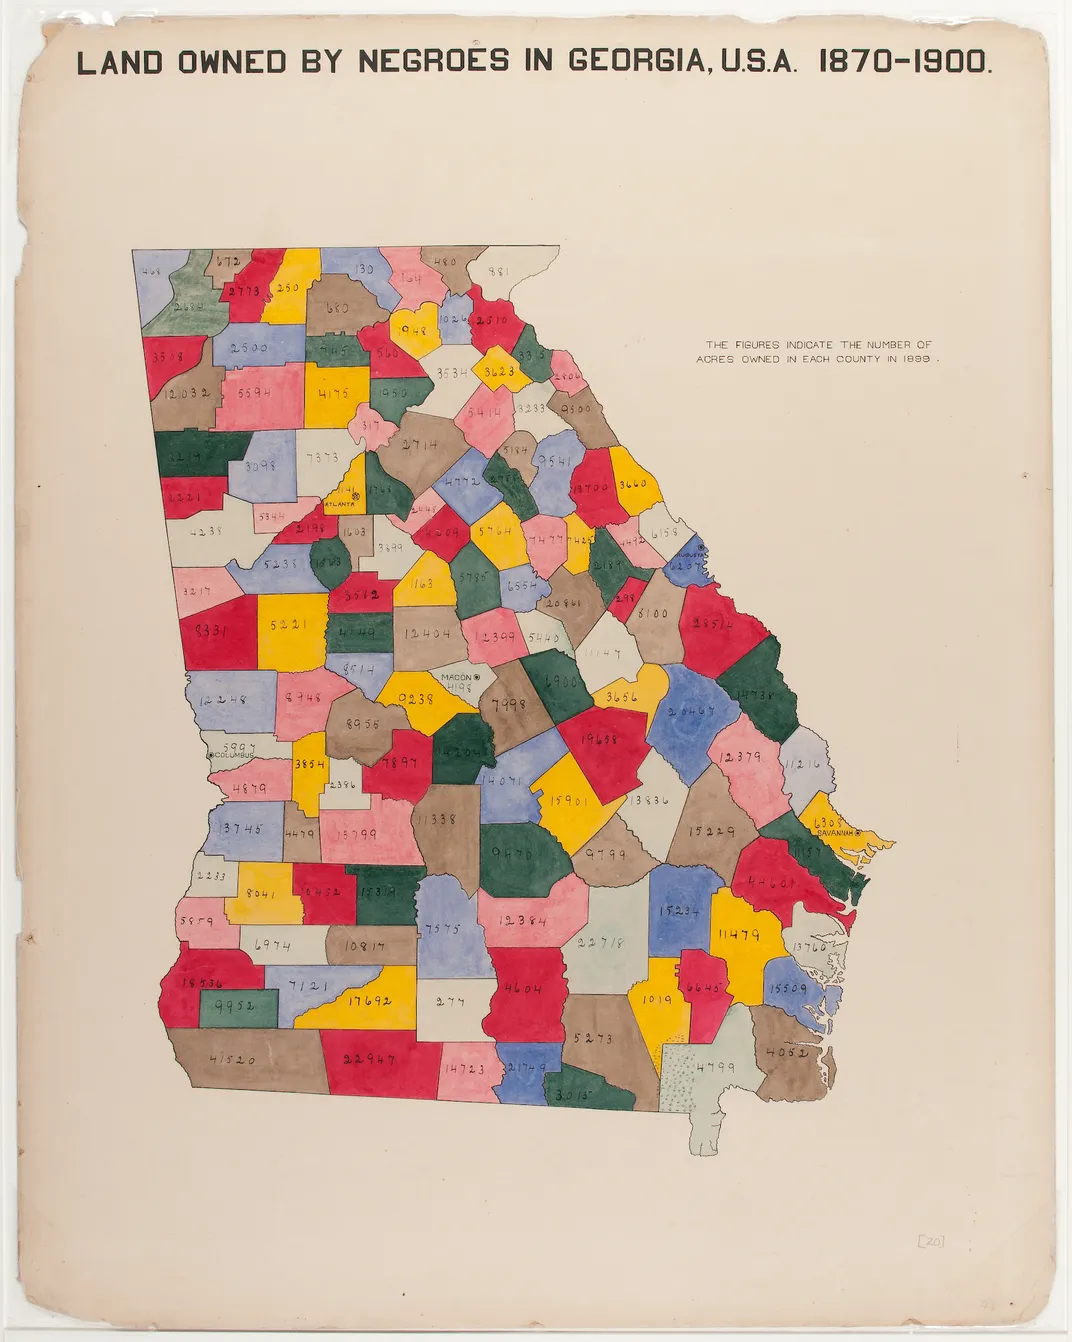 Land owned by Negroes in Georgia, U.S.A 1870-1900 designed by W.E.B. Du Bois and students of Atlanta University, 1900